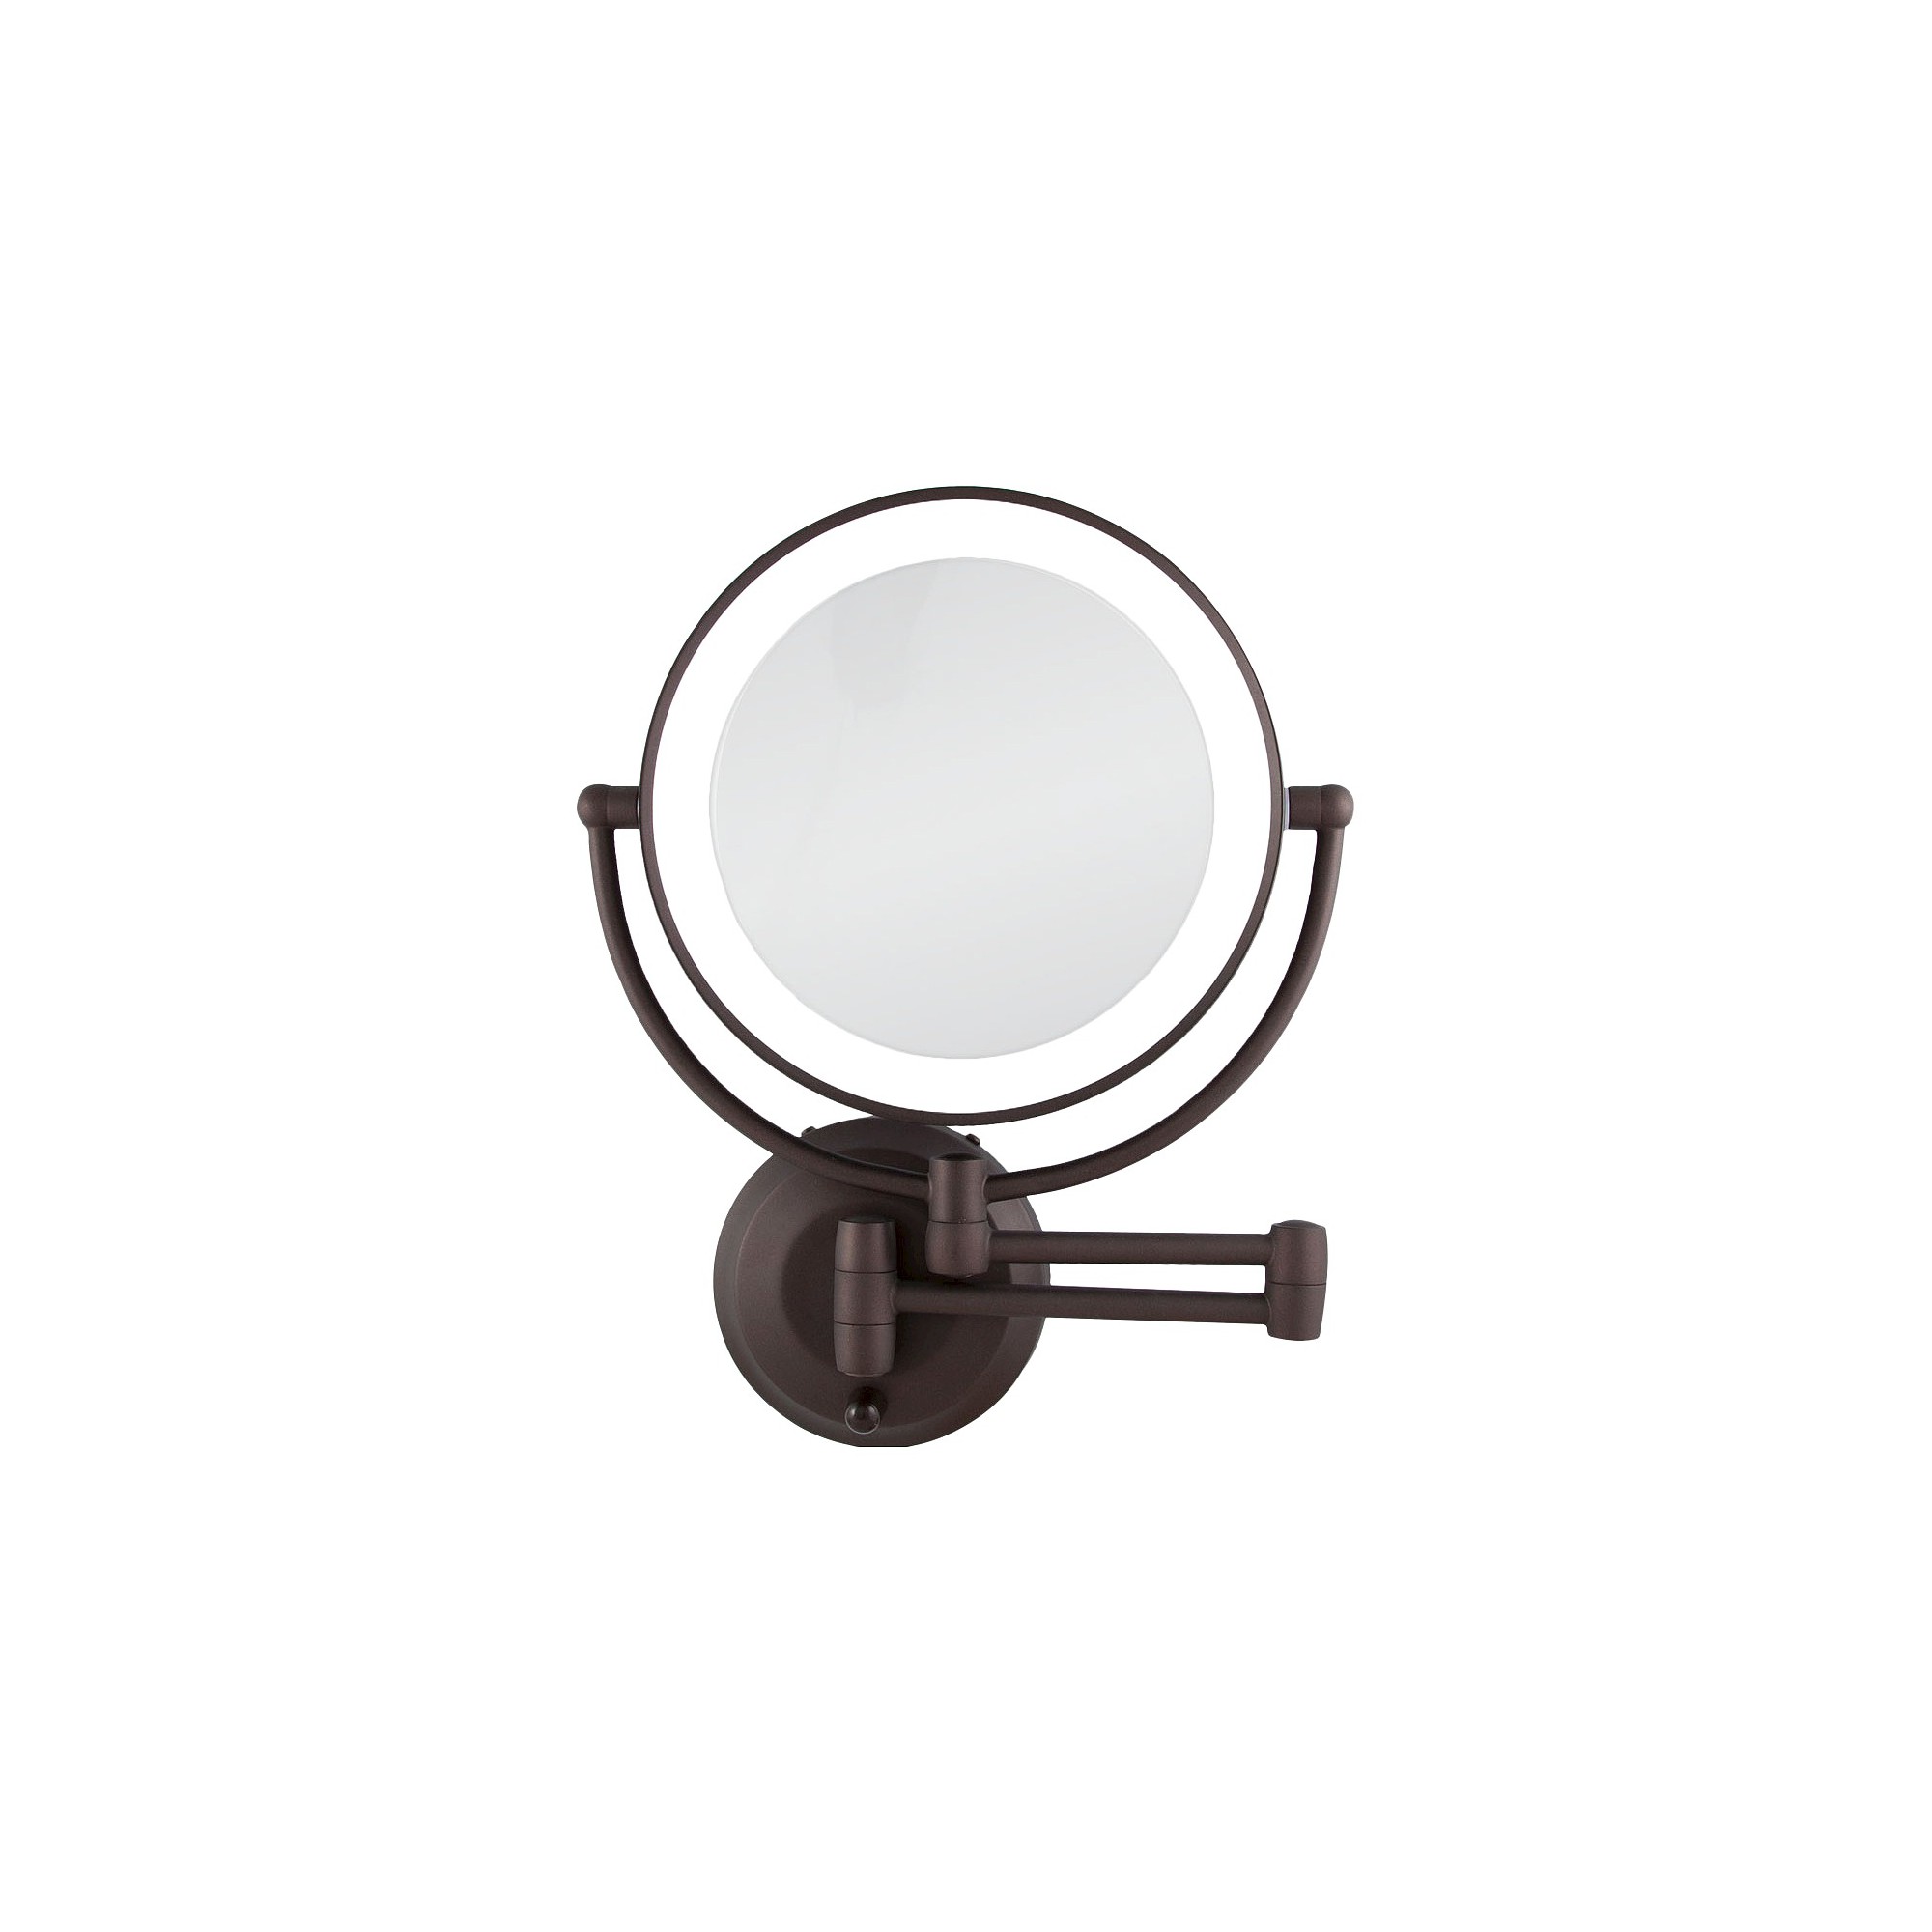 Zadro Dual-Sided LED Lighted 1X/10X Mirror - Oil-Rubbed Bronze